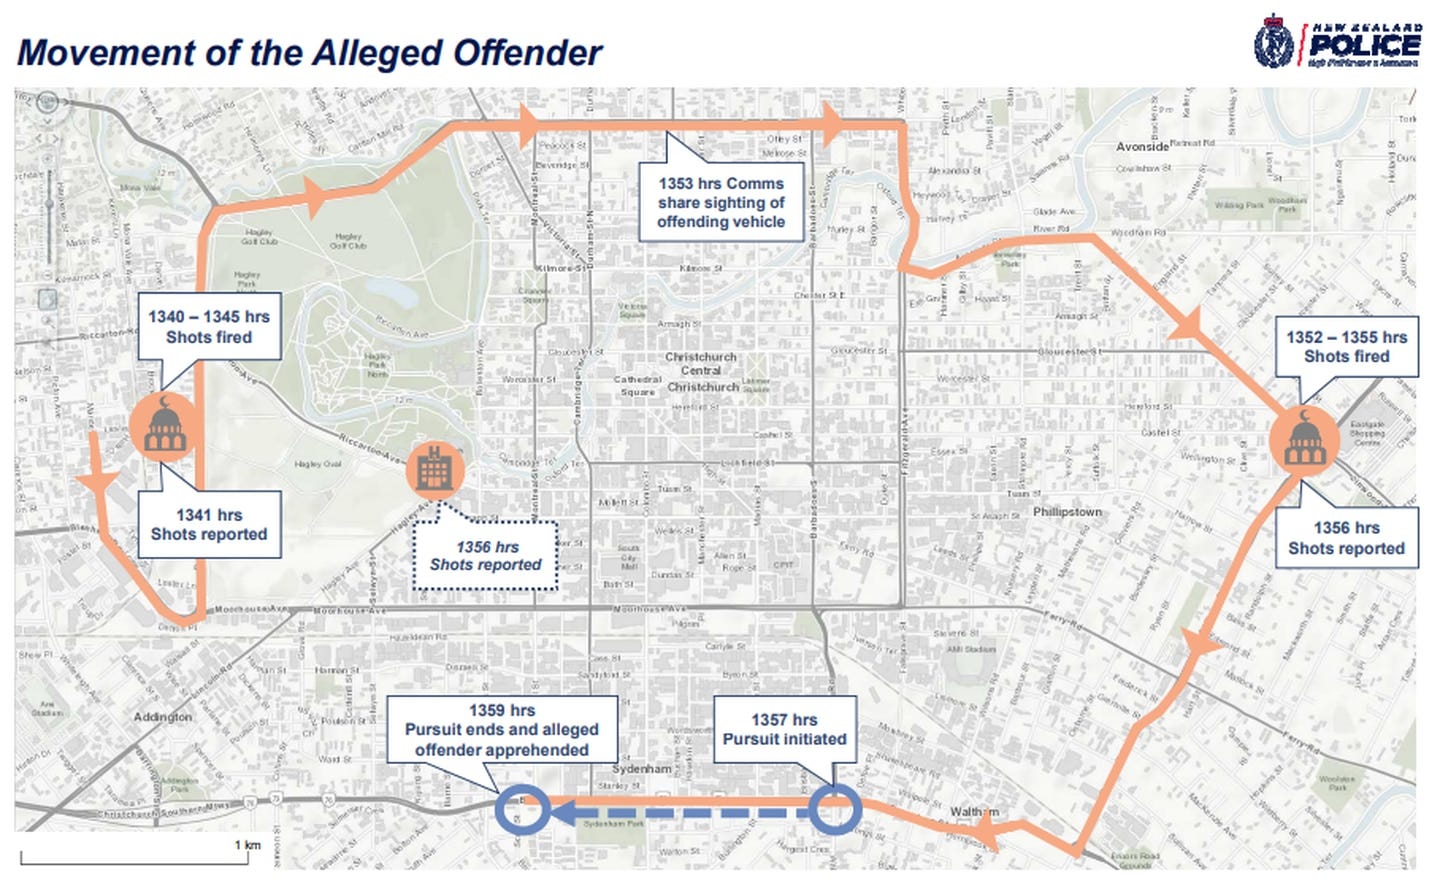 Police today released this map and timeline of the March 15 terror attacks in Christchurch. Image / NZ Police